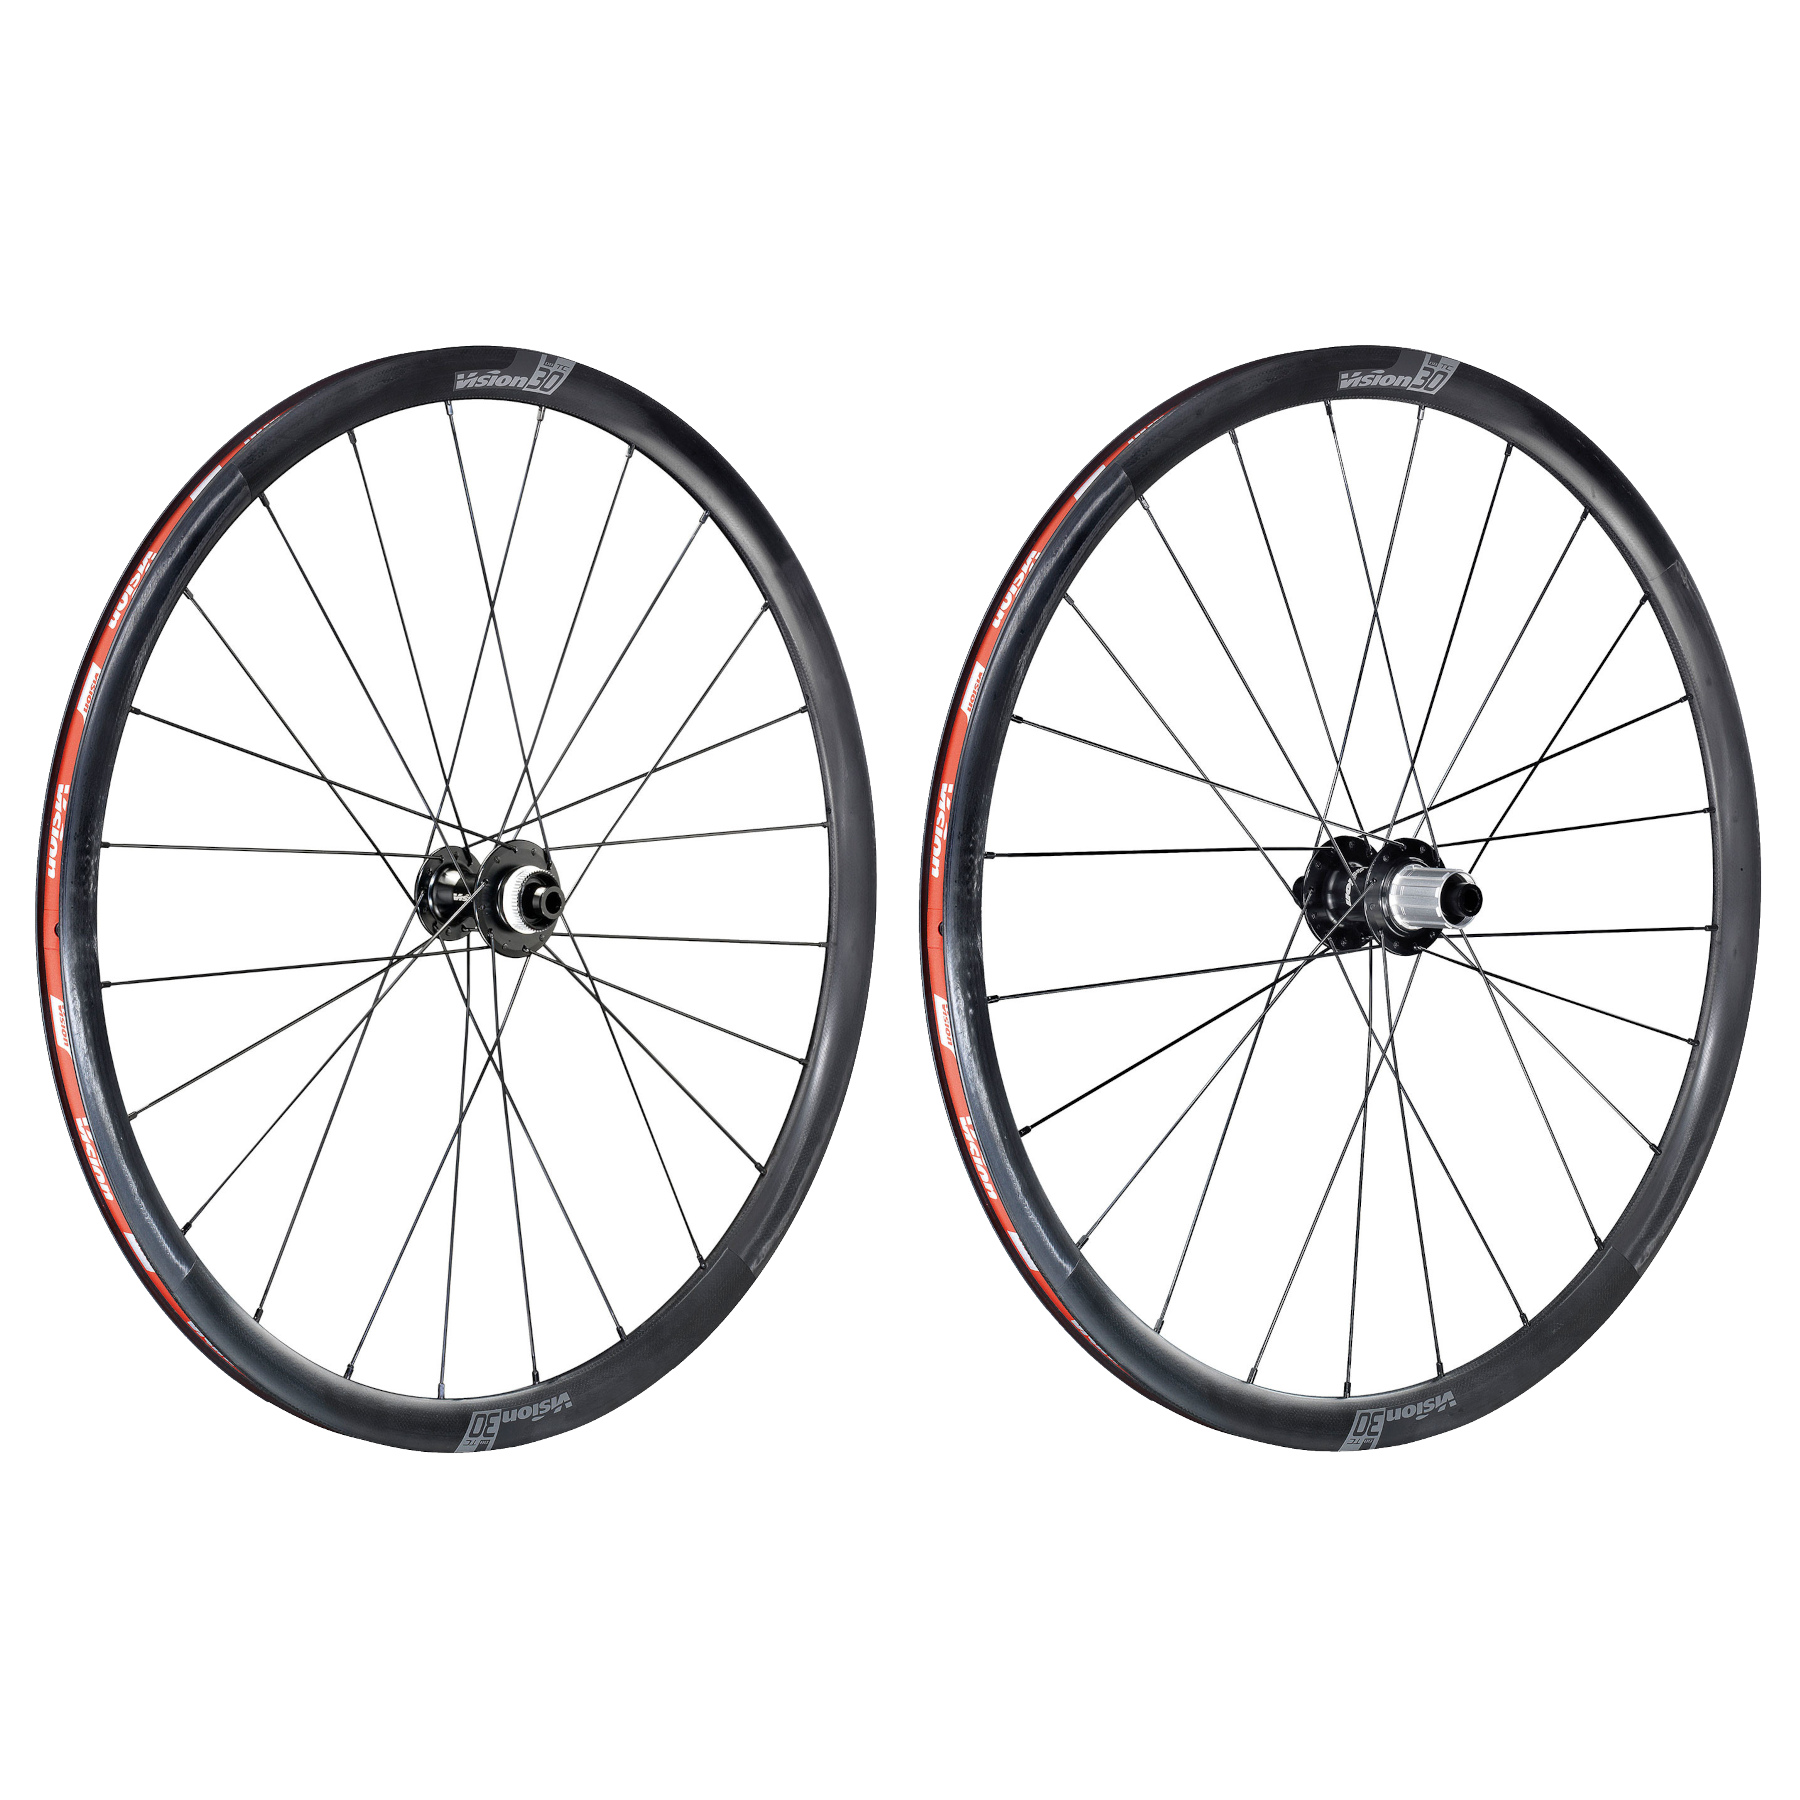 Picture of Vision TC 30 Disc Carbon Wheelset - TLR - Centerlock - 12x100mm | 12x142mm - Shimano HG